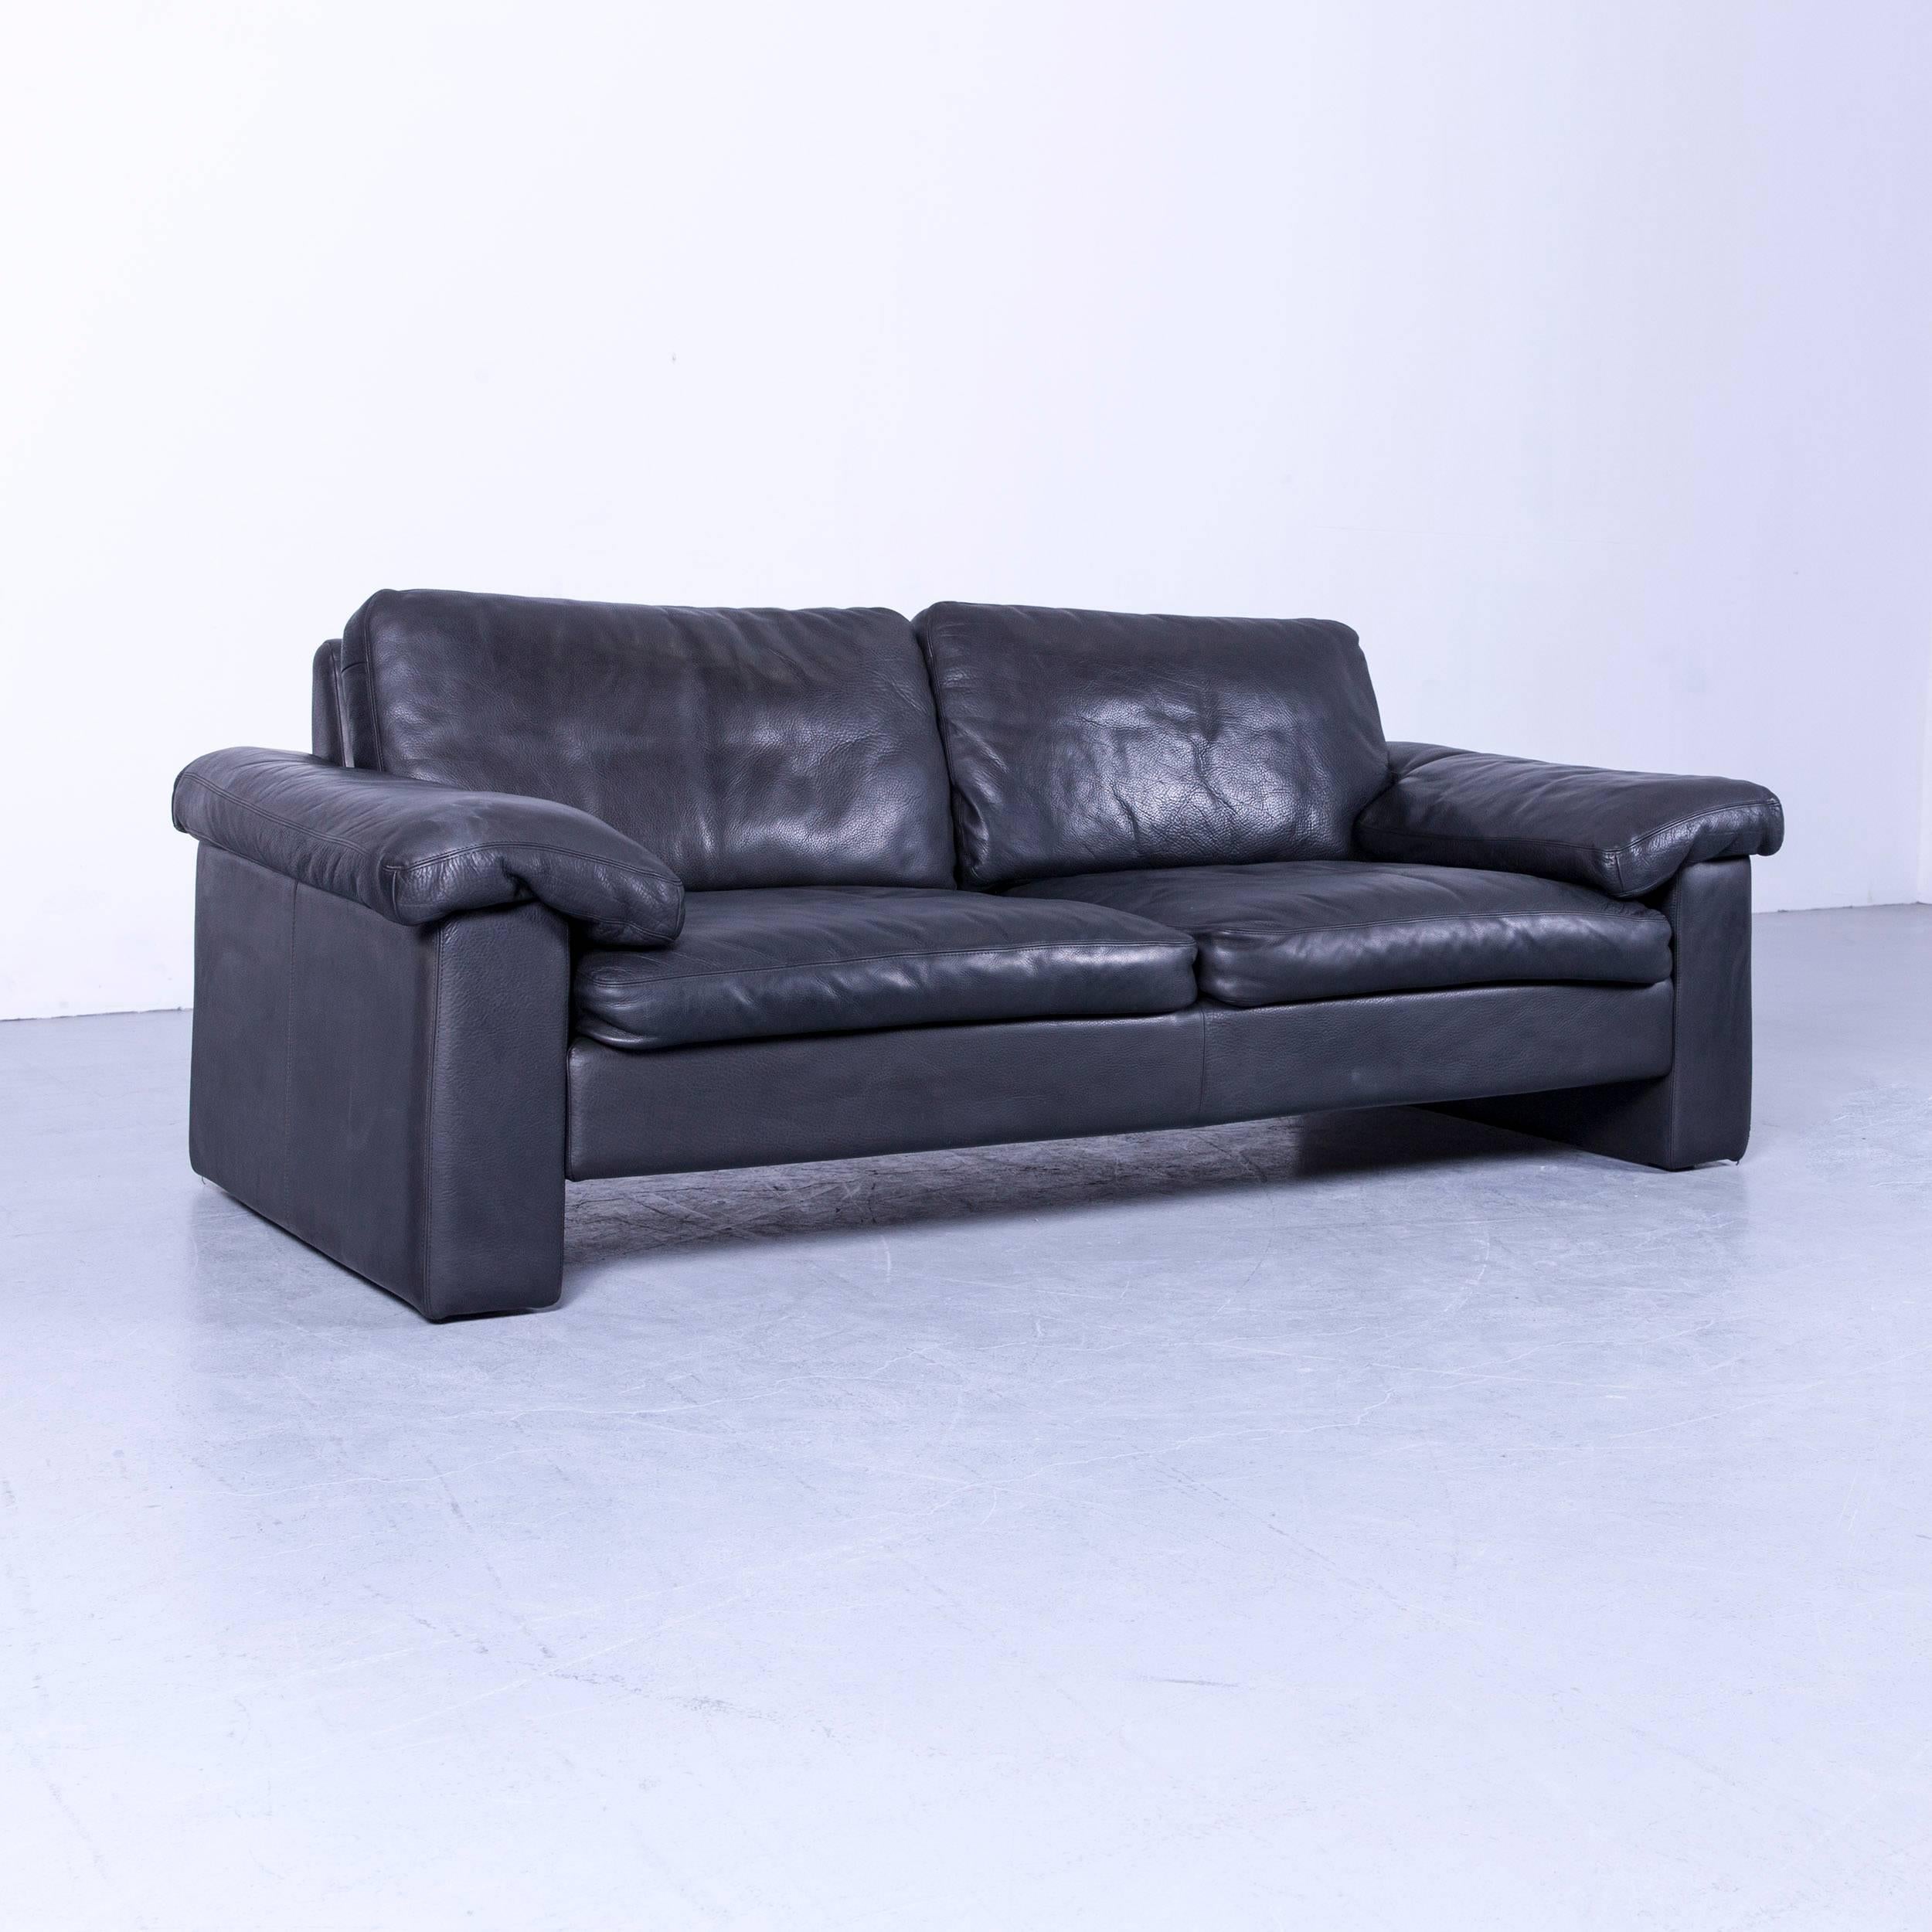 COR Conseta designer leather sofa black two-seat Couch Friedrich-Wilhelm Möller, in a minimalistic and modern design, made for pure comfort.